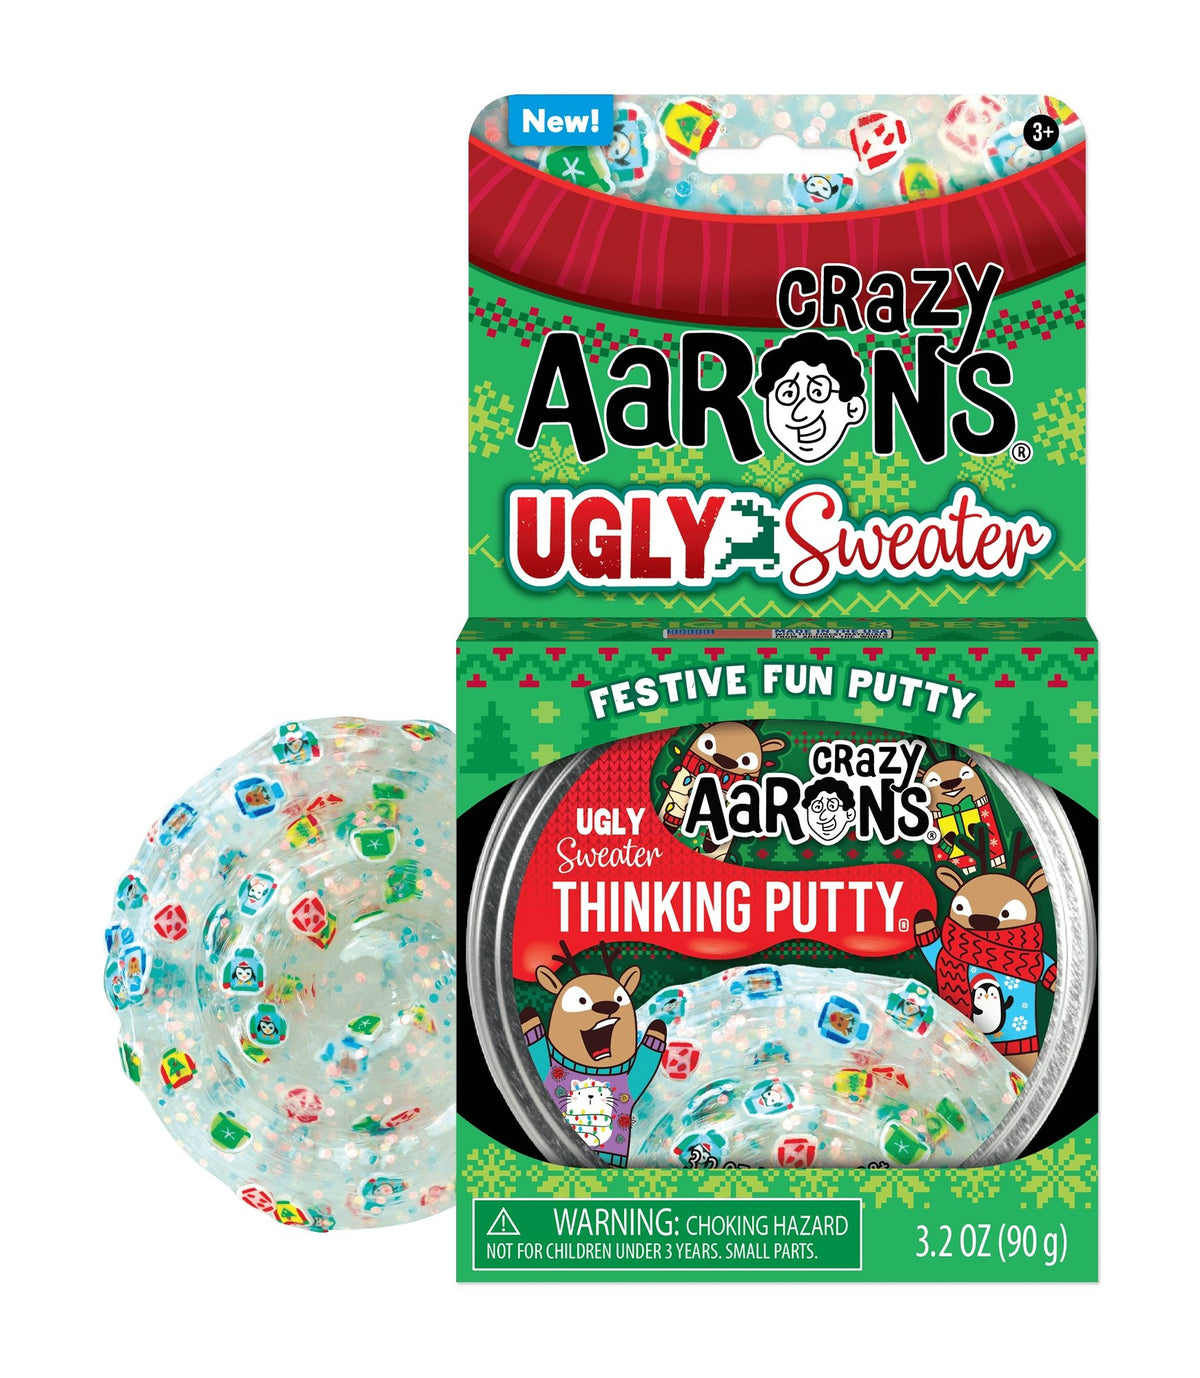 Crazy Aaron's Thinking Putty - Ugly Sweater